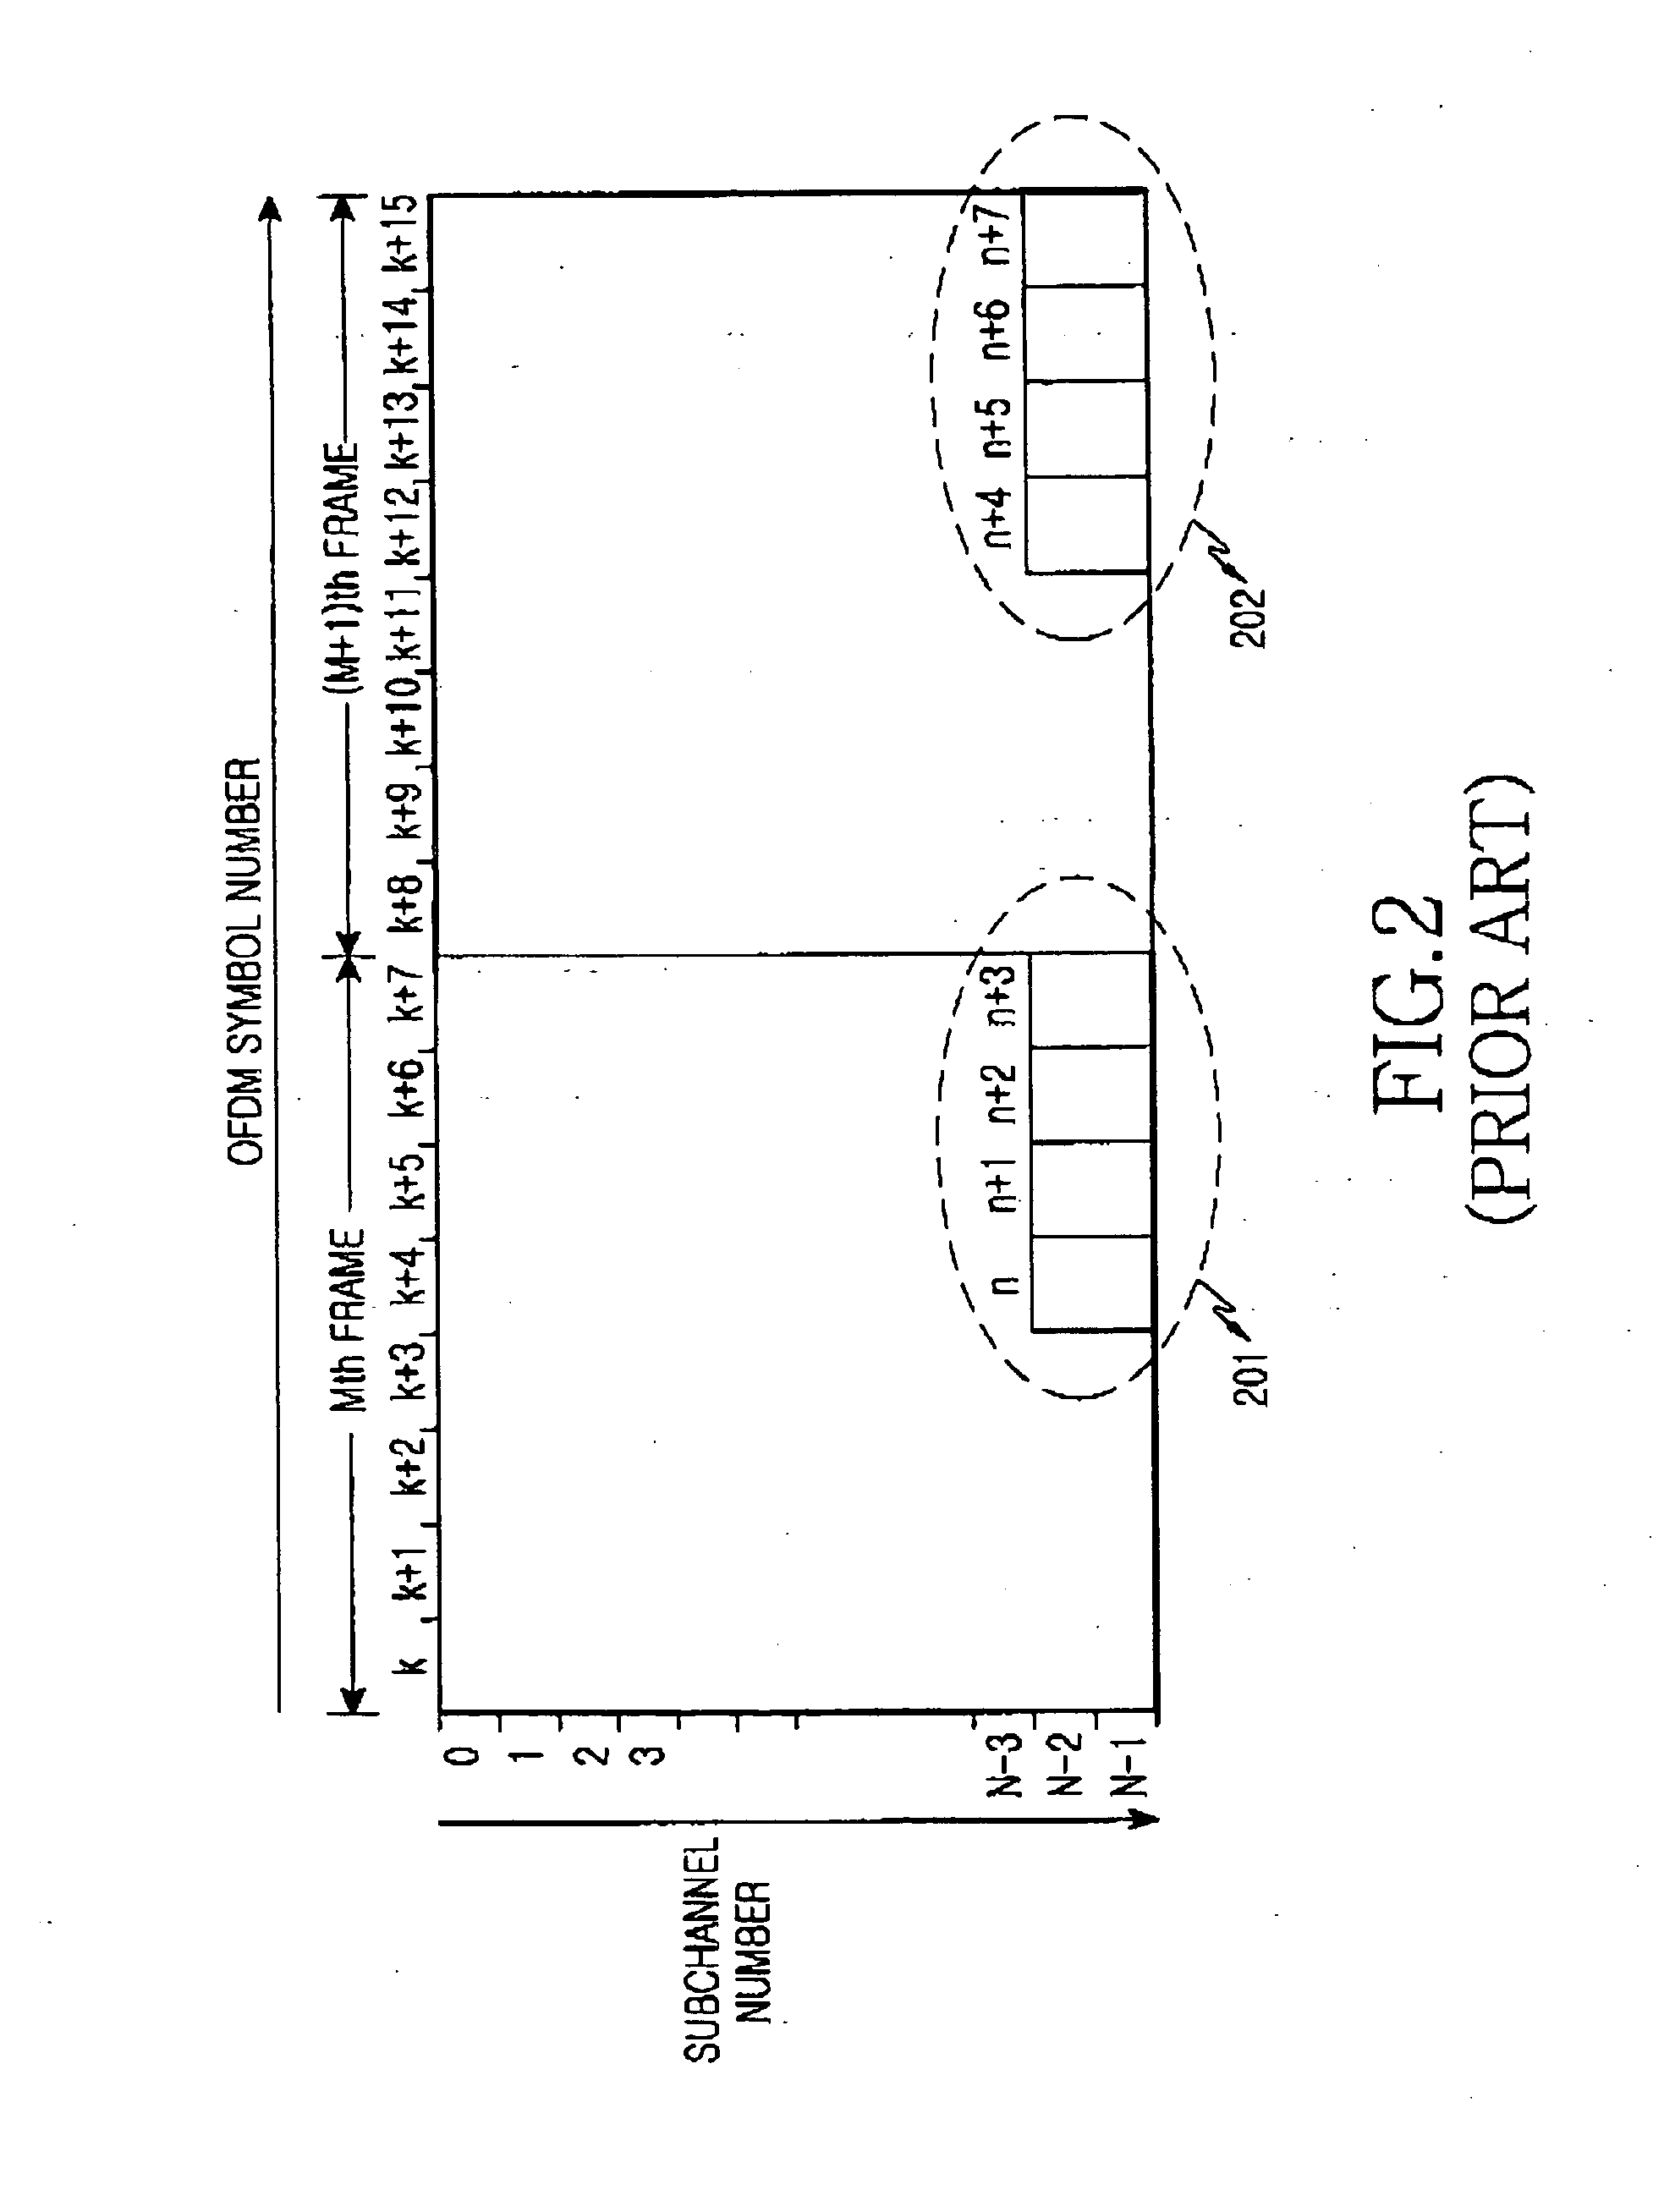 Apparatus and method for modulating ranging signals in a broadband wireless access communication system